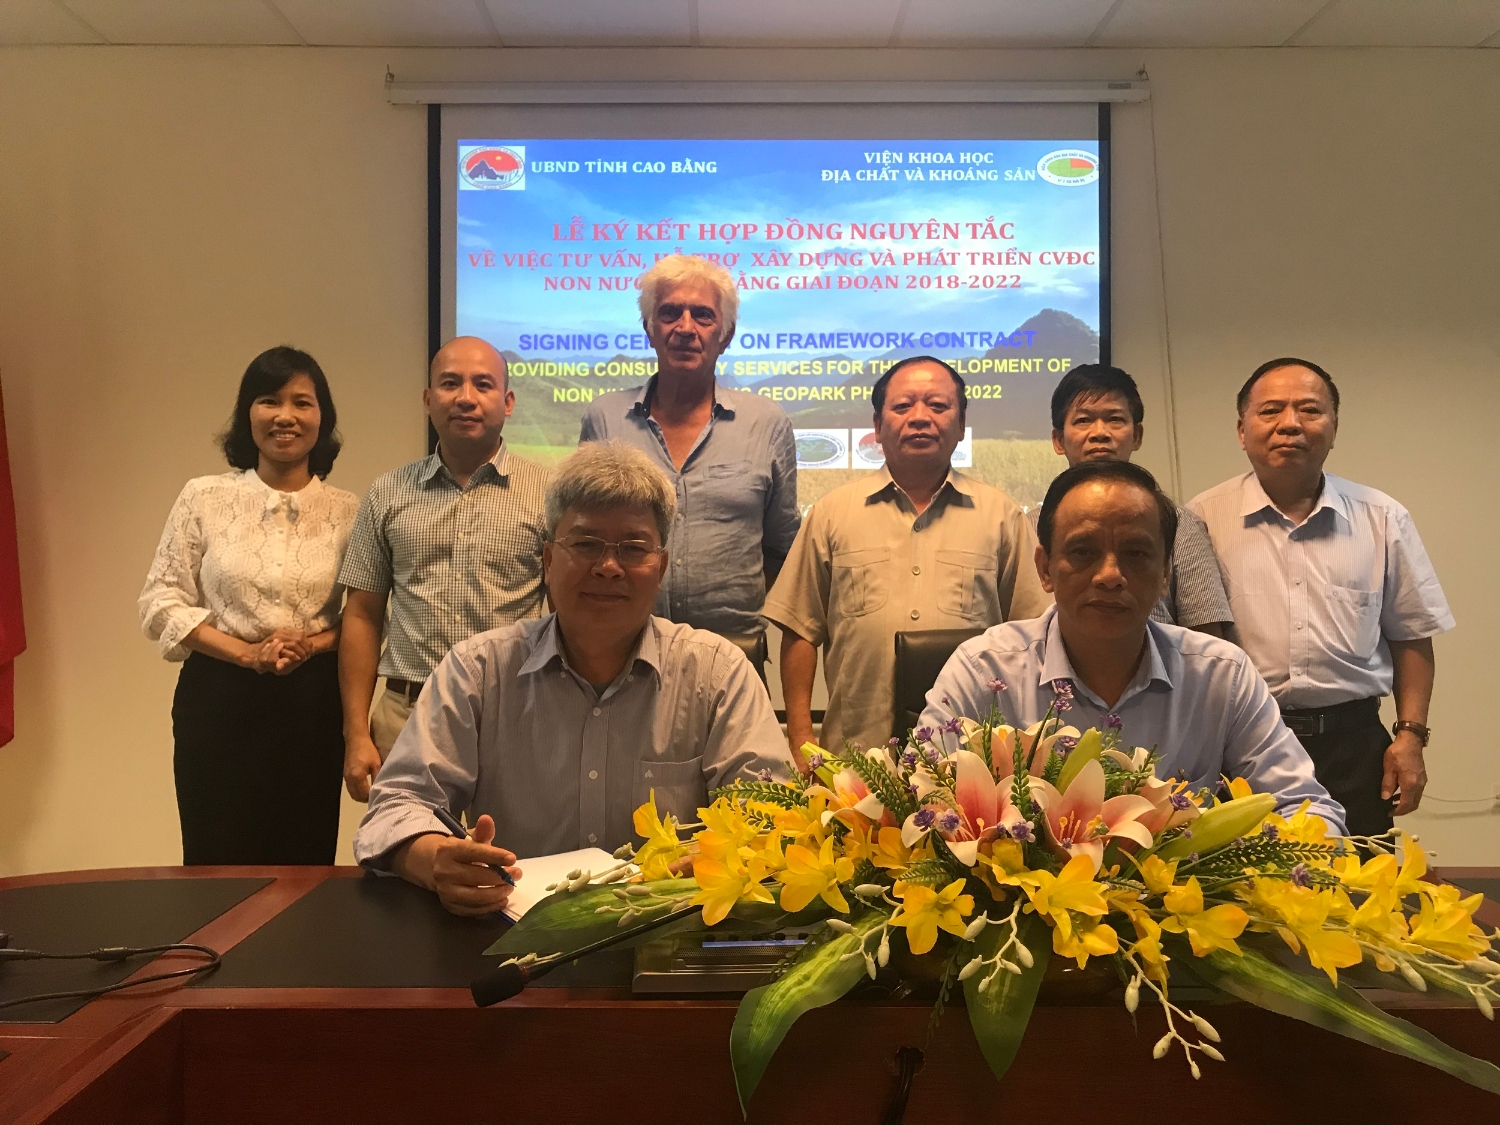 Framework signing ceremony between People’s committee of Cao Bang province and Institute of Geology and Mineral resources. 